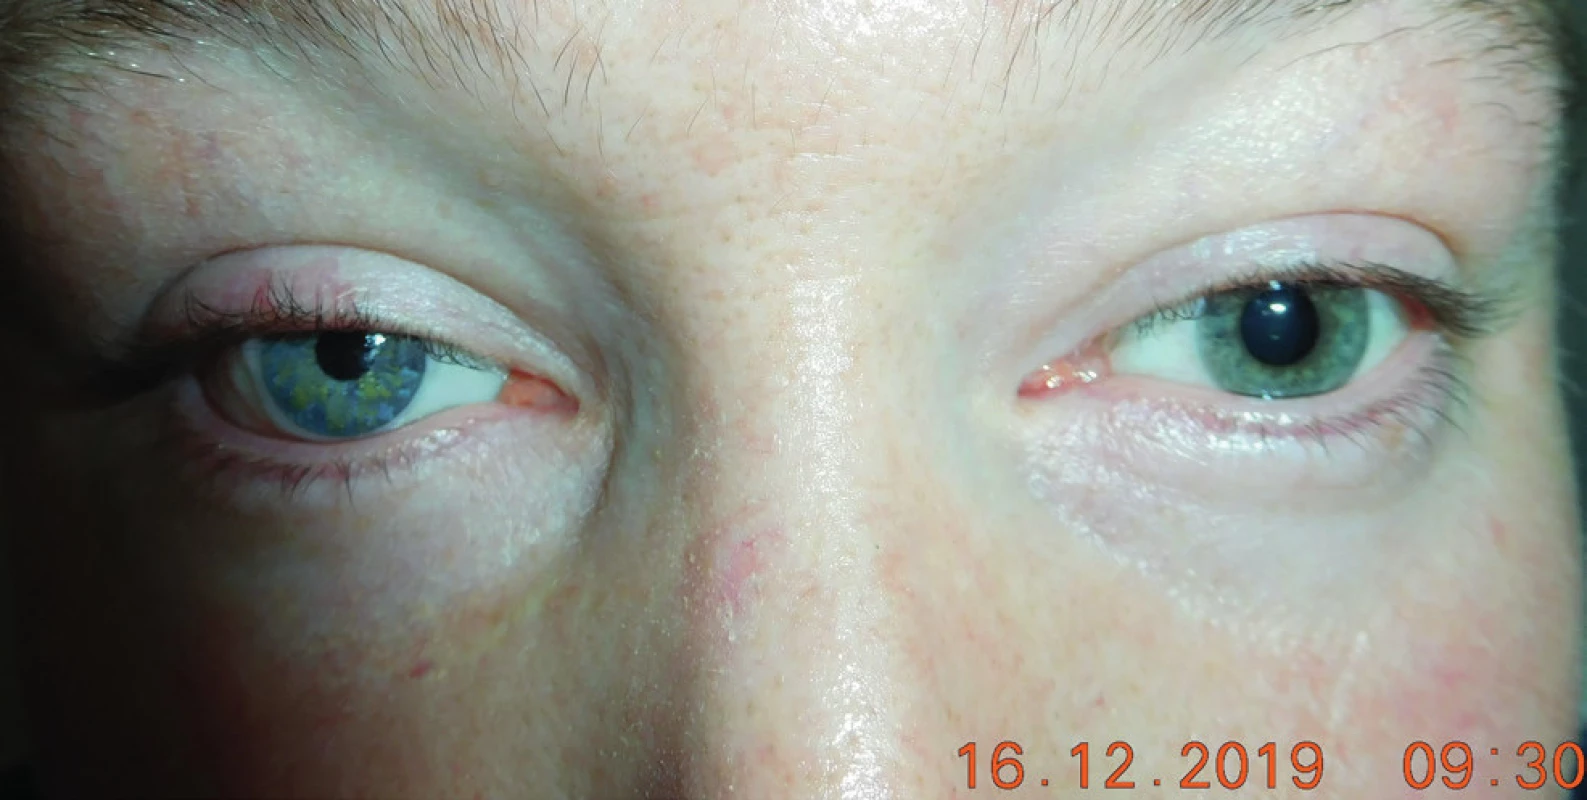 Macro-photo – patient with application of individual prosthesis in right eye in 2019